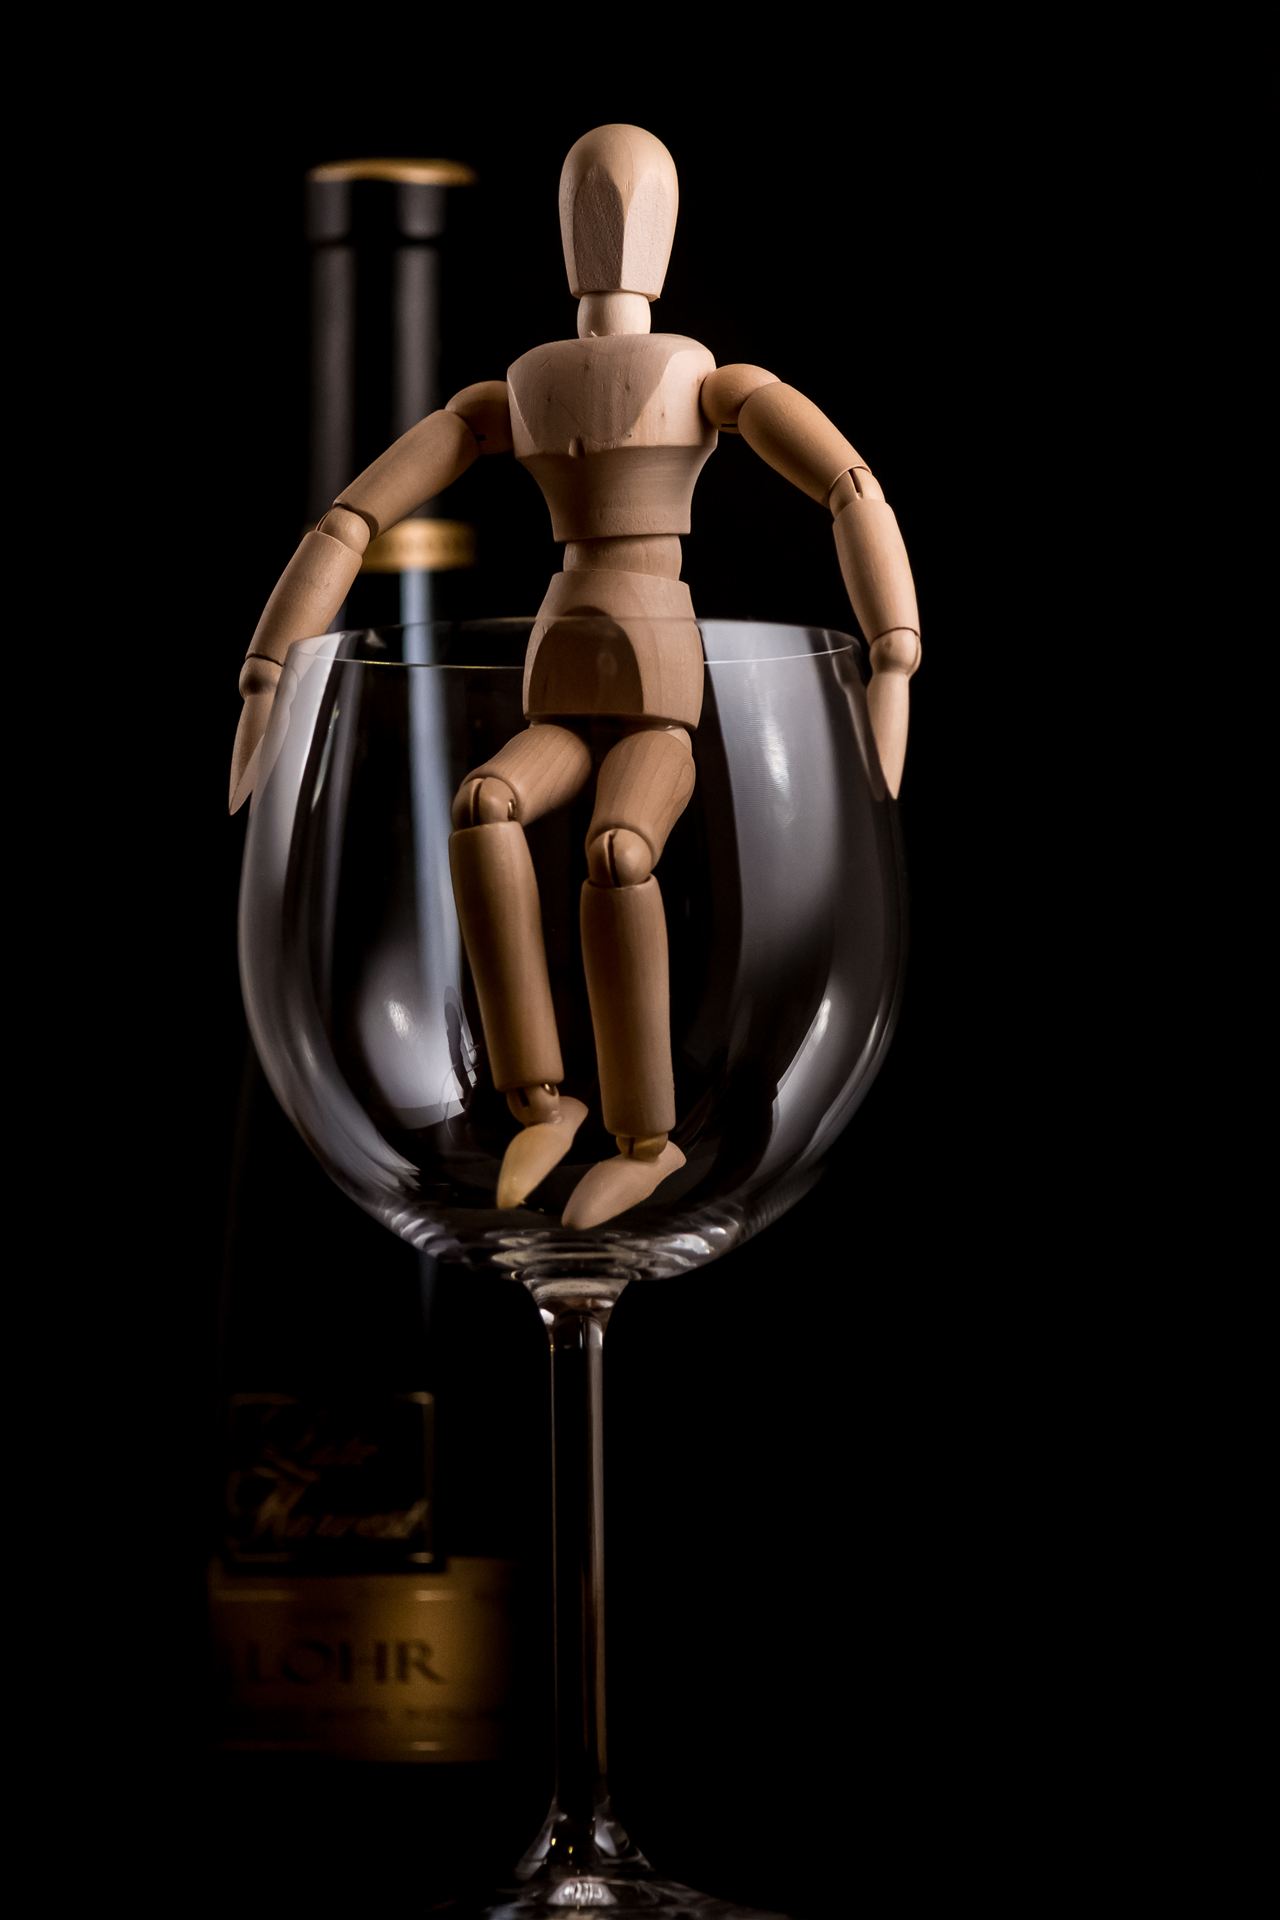 Artificial Oenophile.jpg Artie contemplates a good glass of wine by Sarah Williams